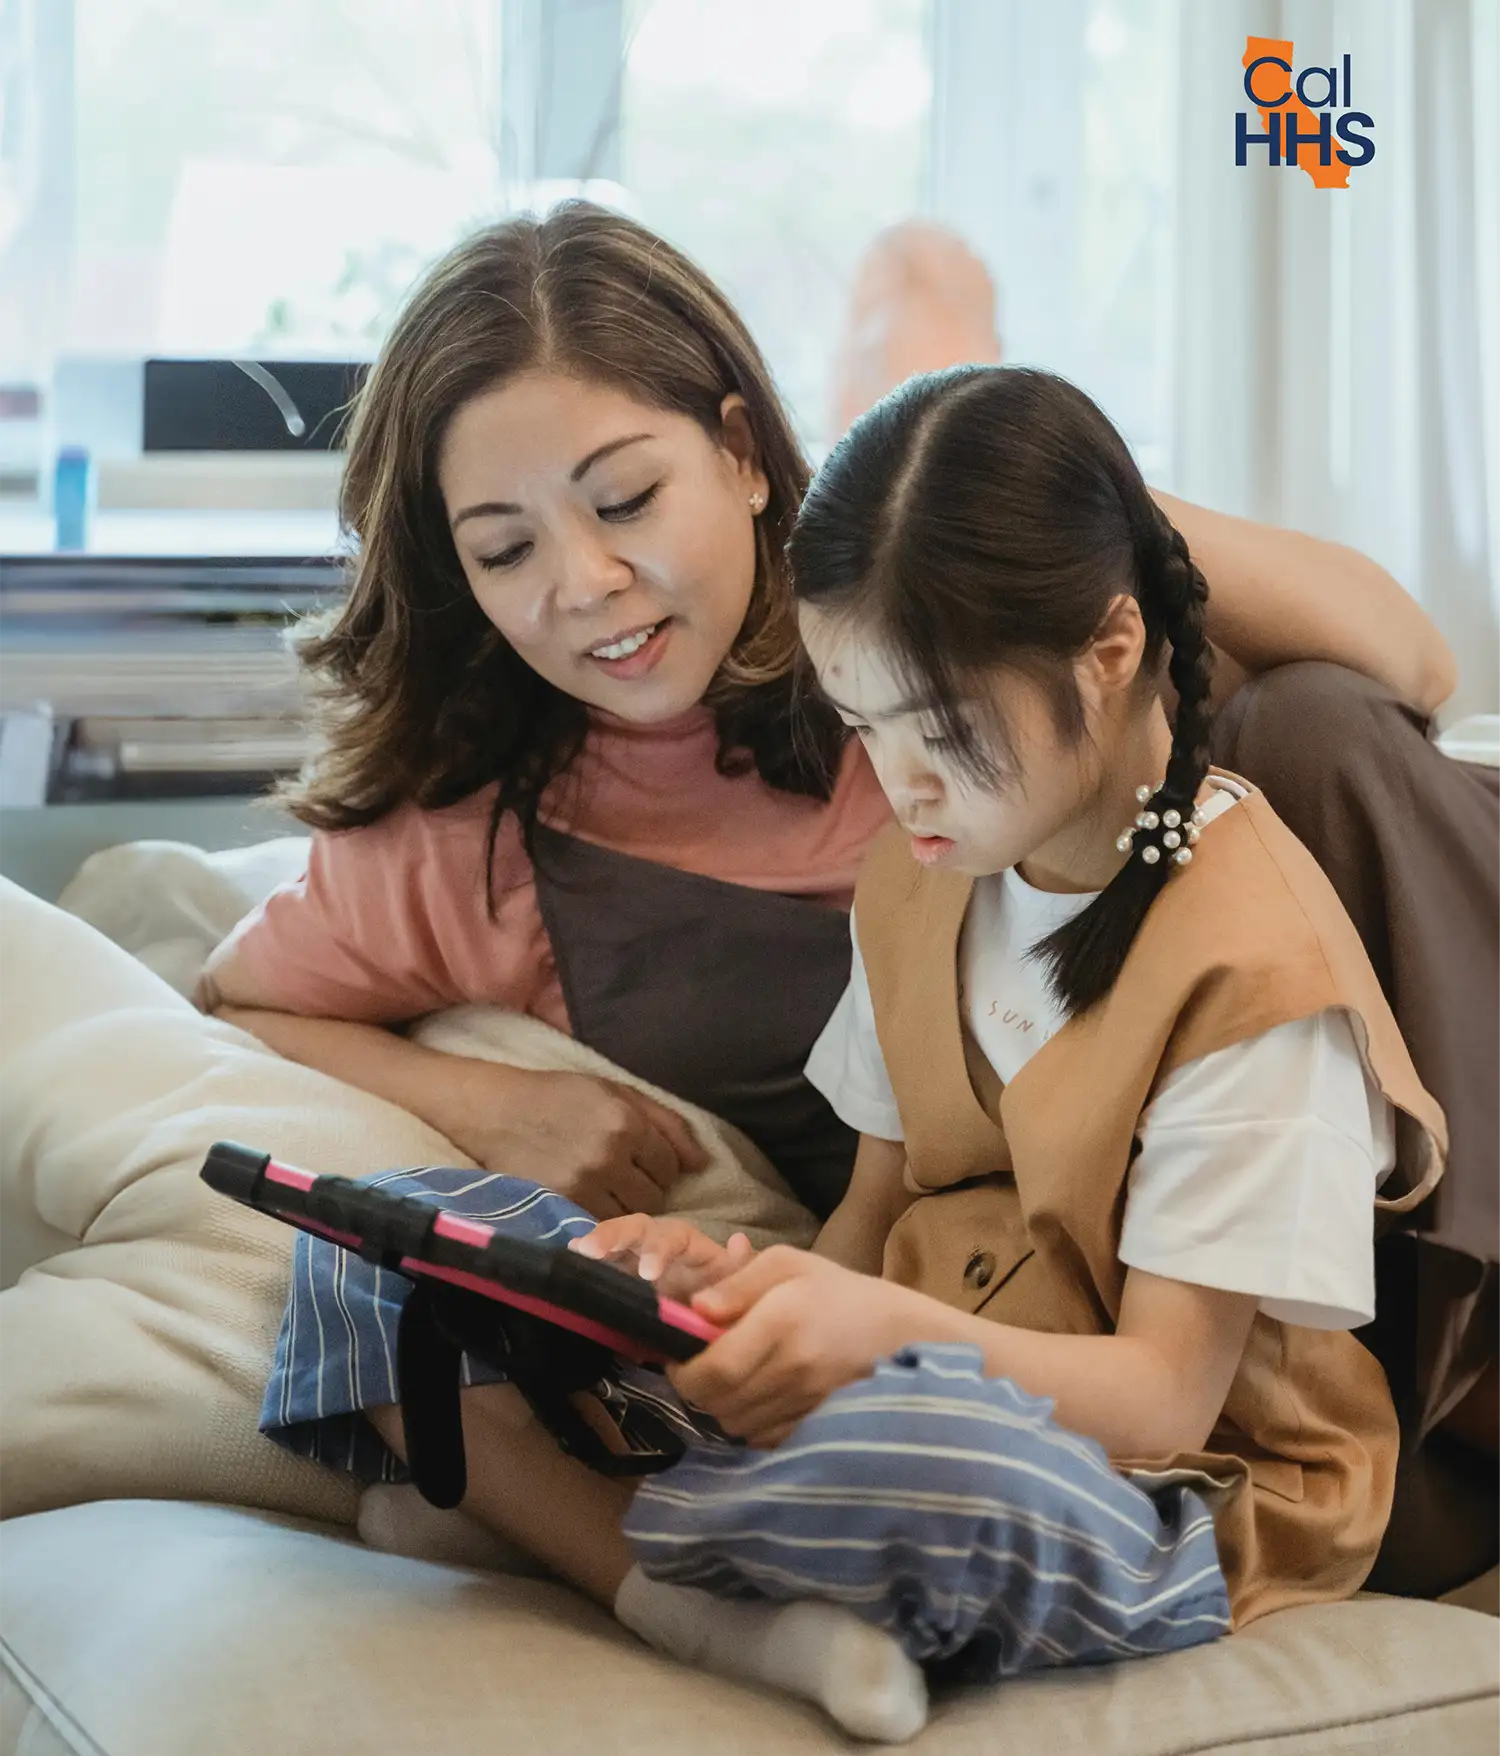 photo of girl holding an ipad with adult woman supervising her